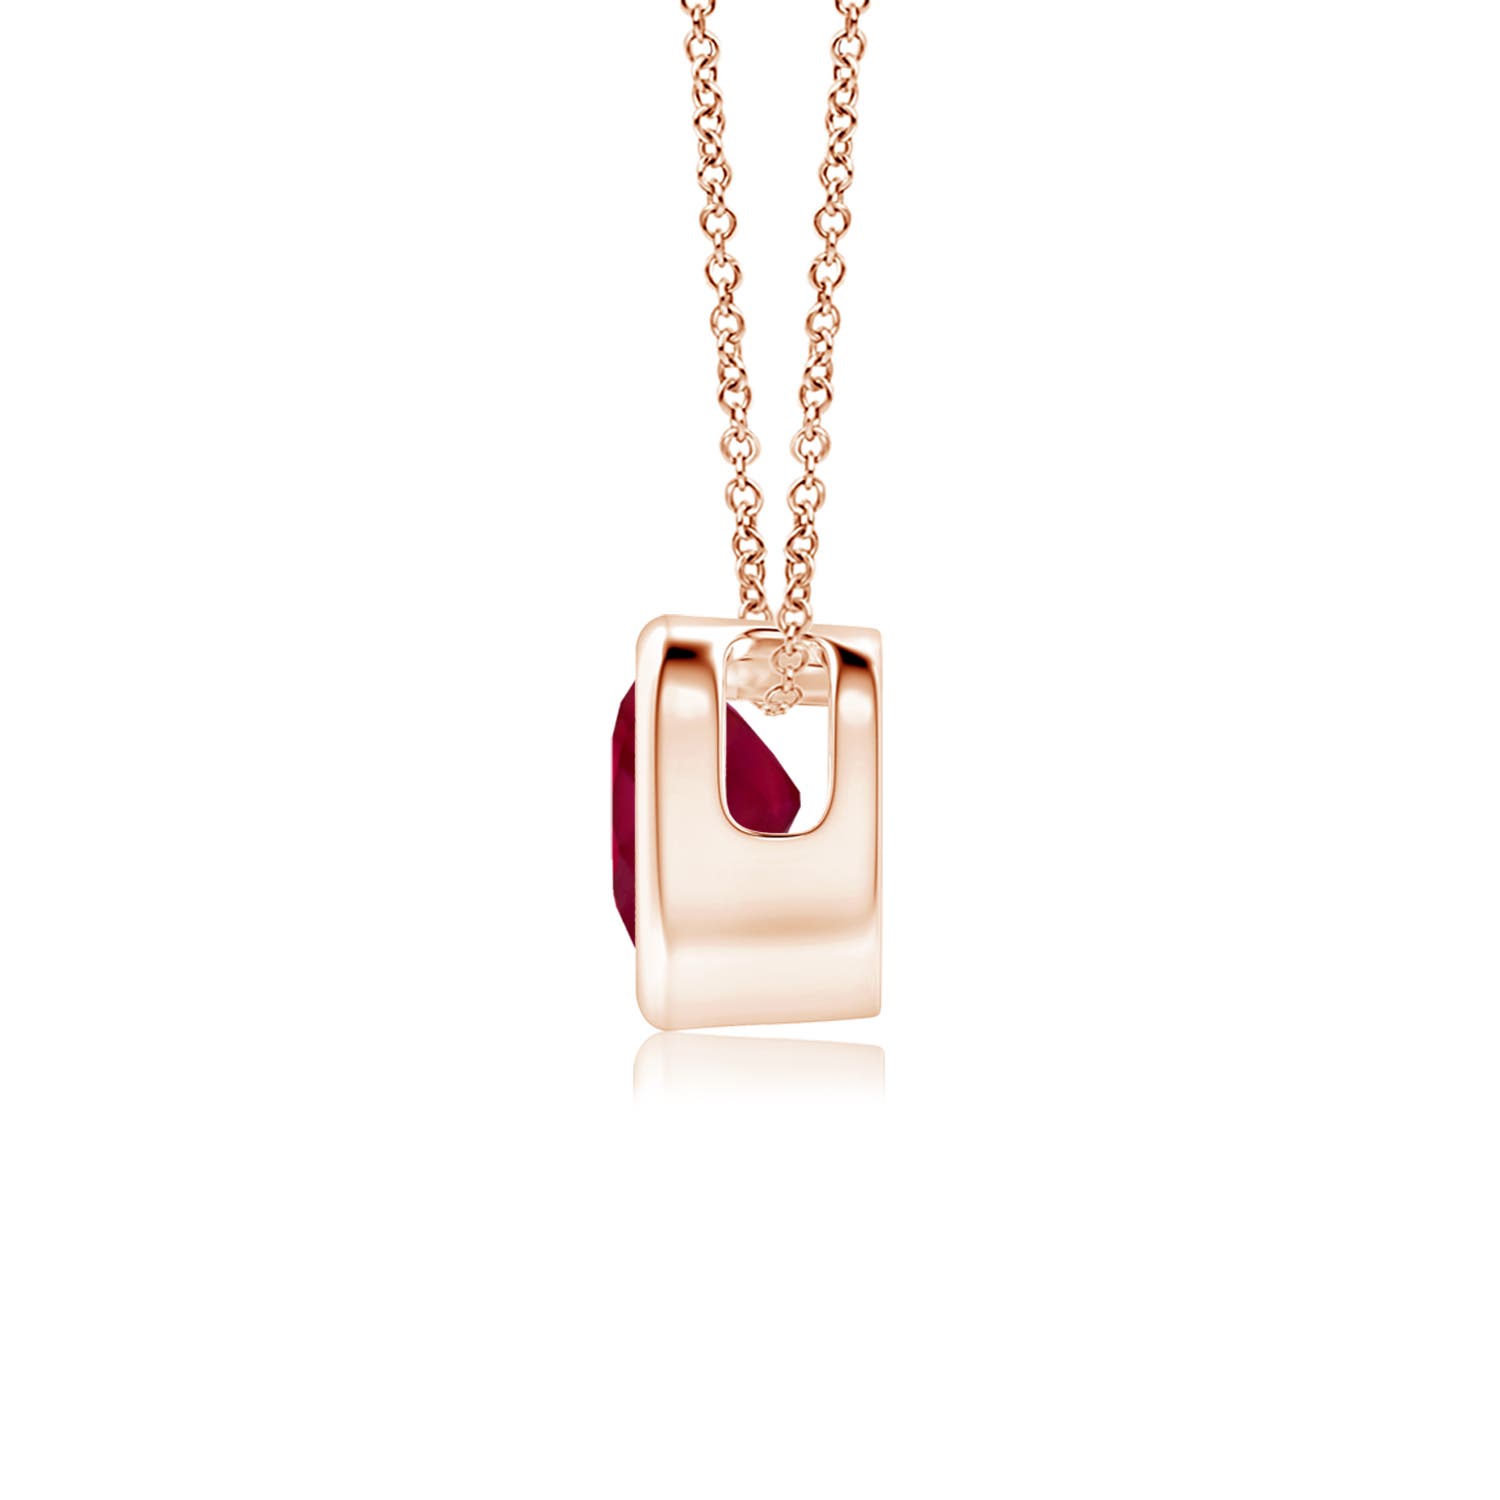 A - Ruby / 0.3 CT / 14 KT Rose Gold